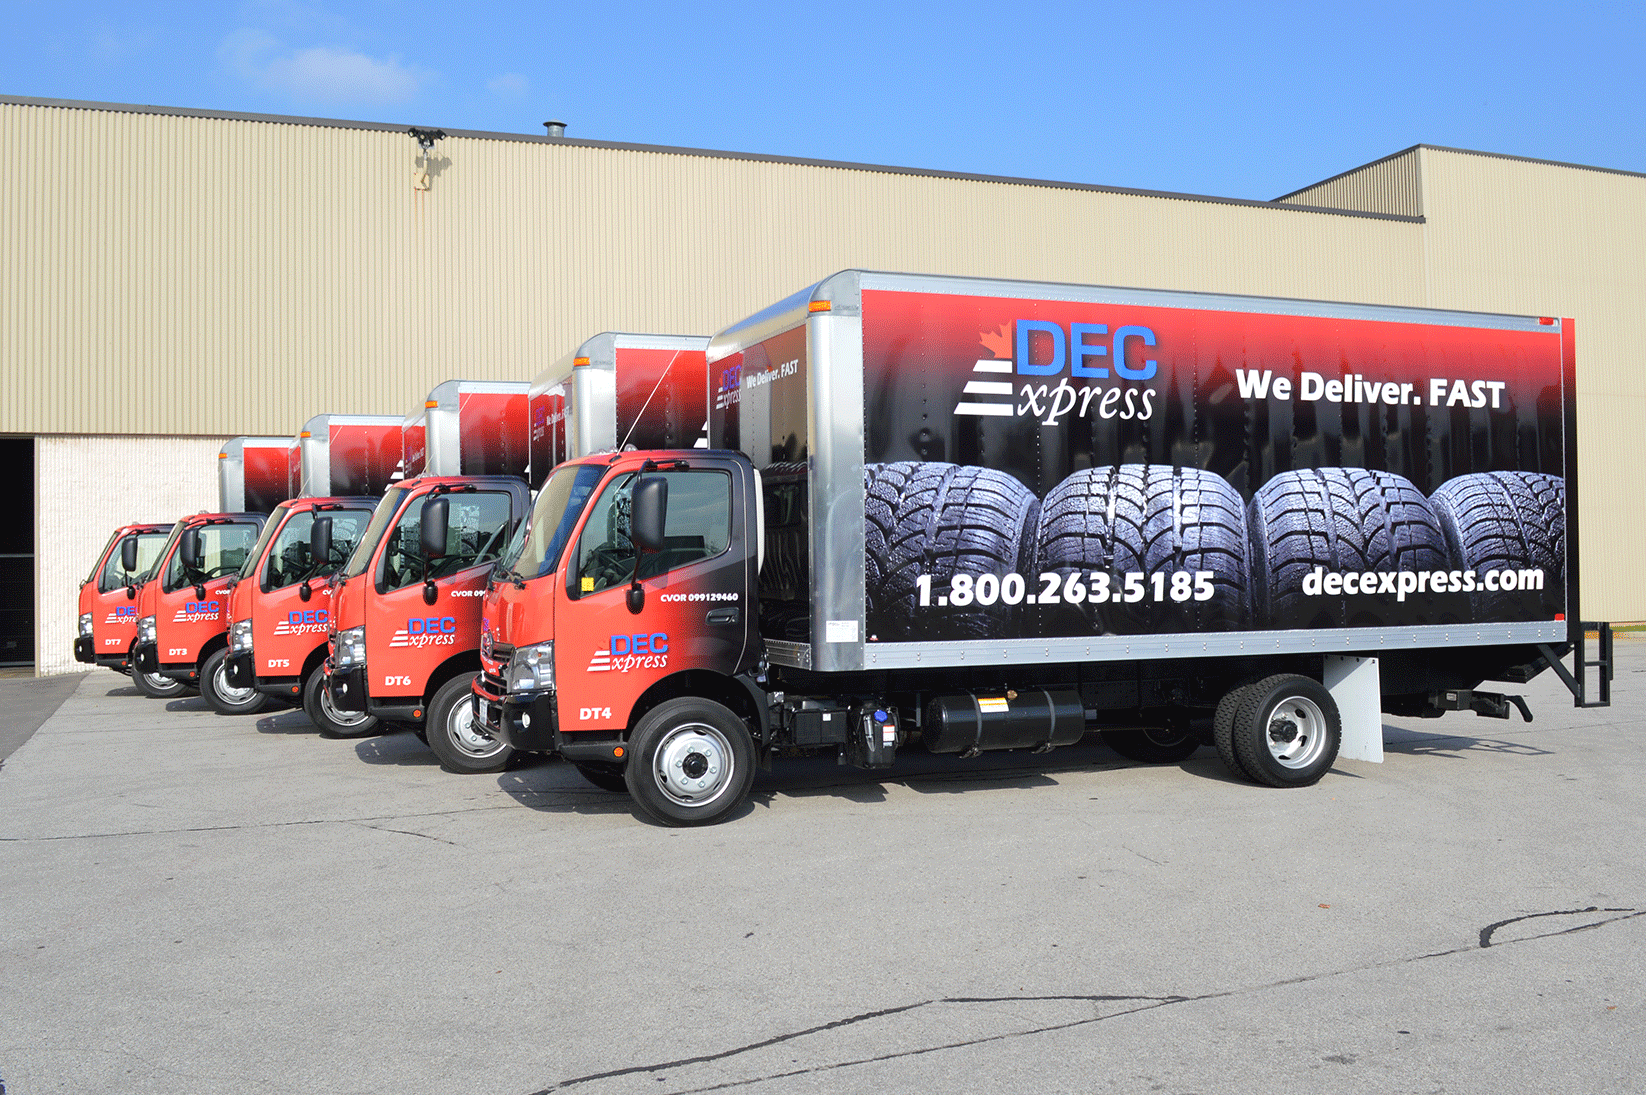 A fleet of cube trucks wrapped in the same fleet graphics to create branding on the company's commercial vehicle fleet